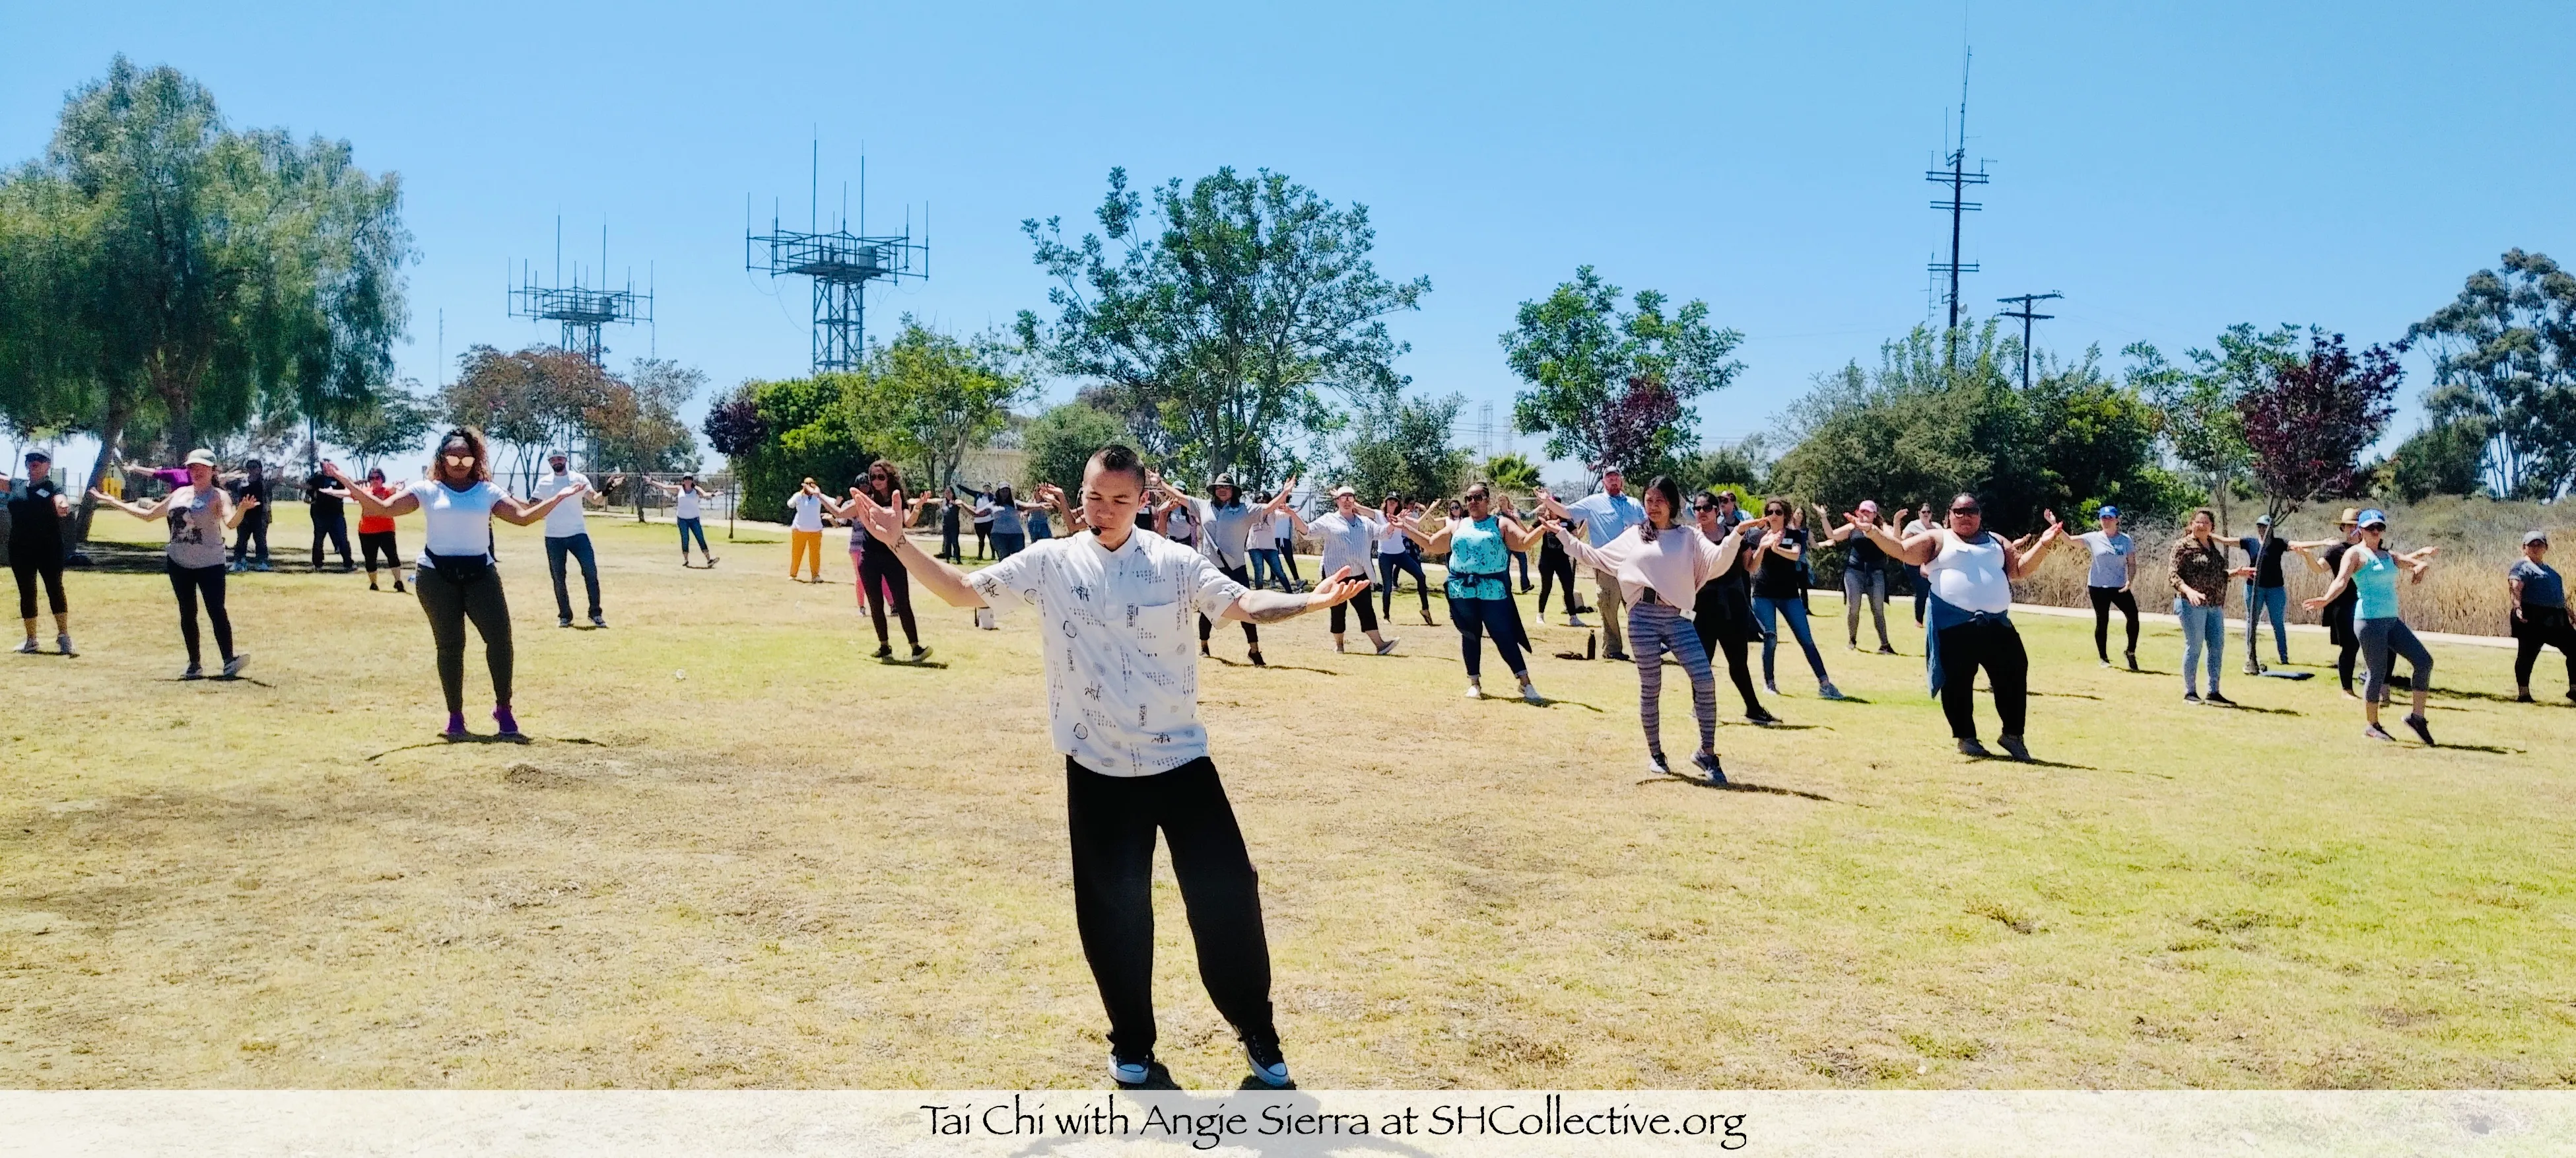 tai chi class in a spacious outdoor field with an average of 50 participants